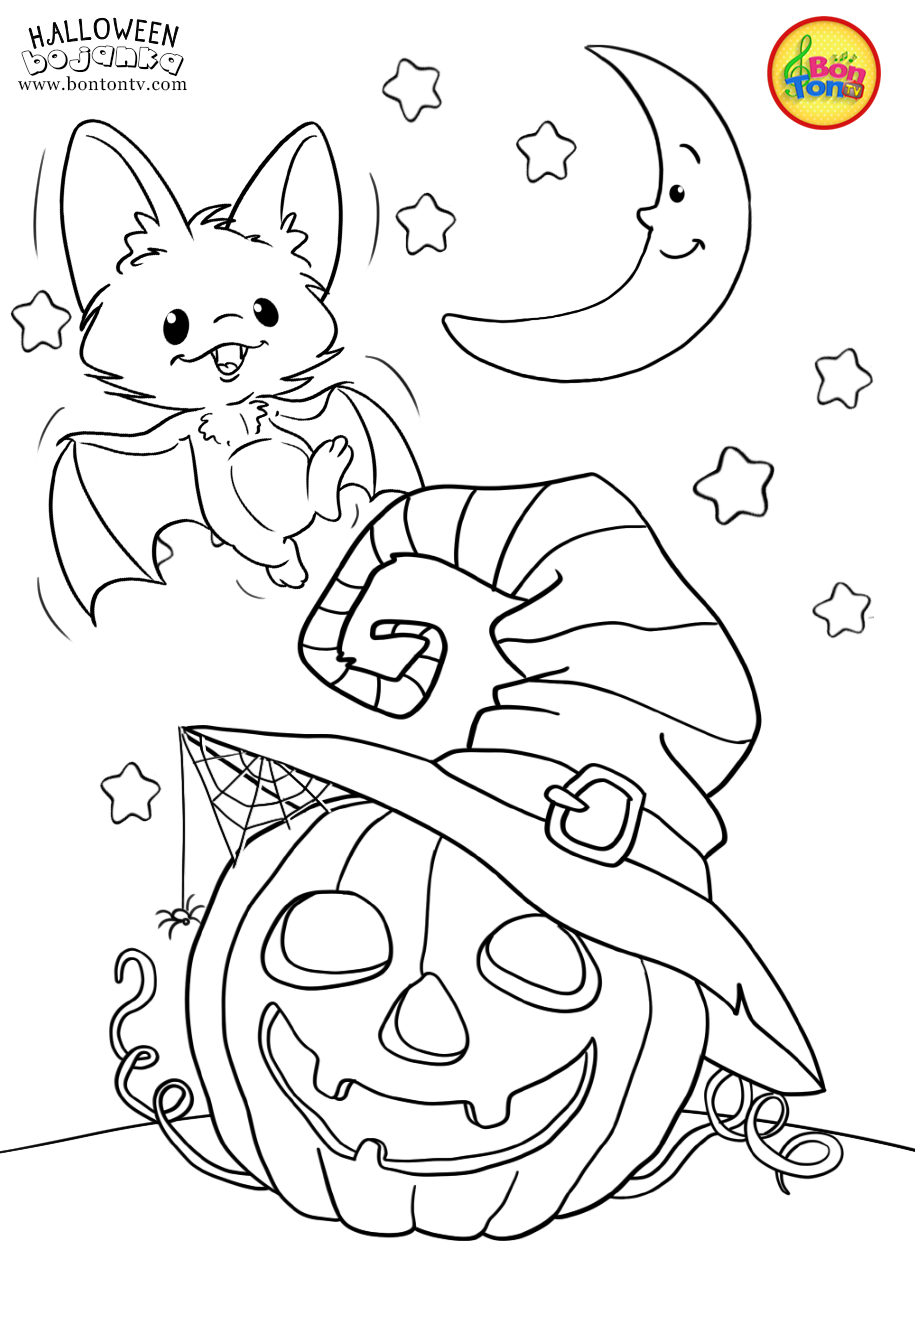 Halloween Coloring Pages For Kids - Free Preschool